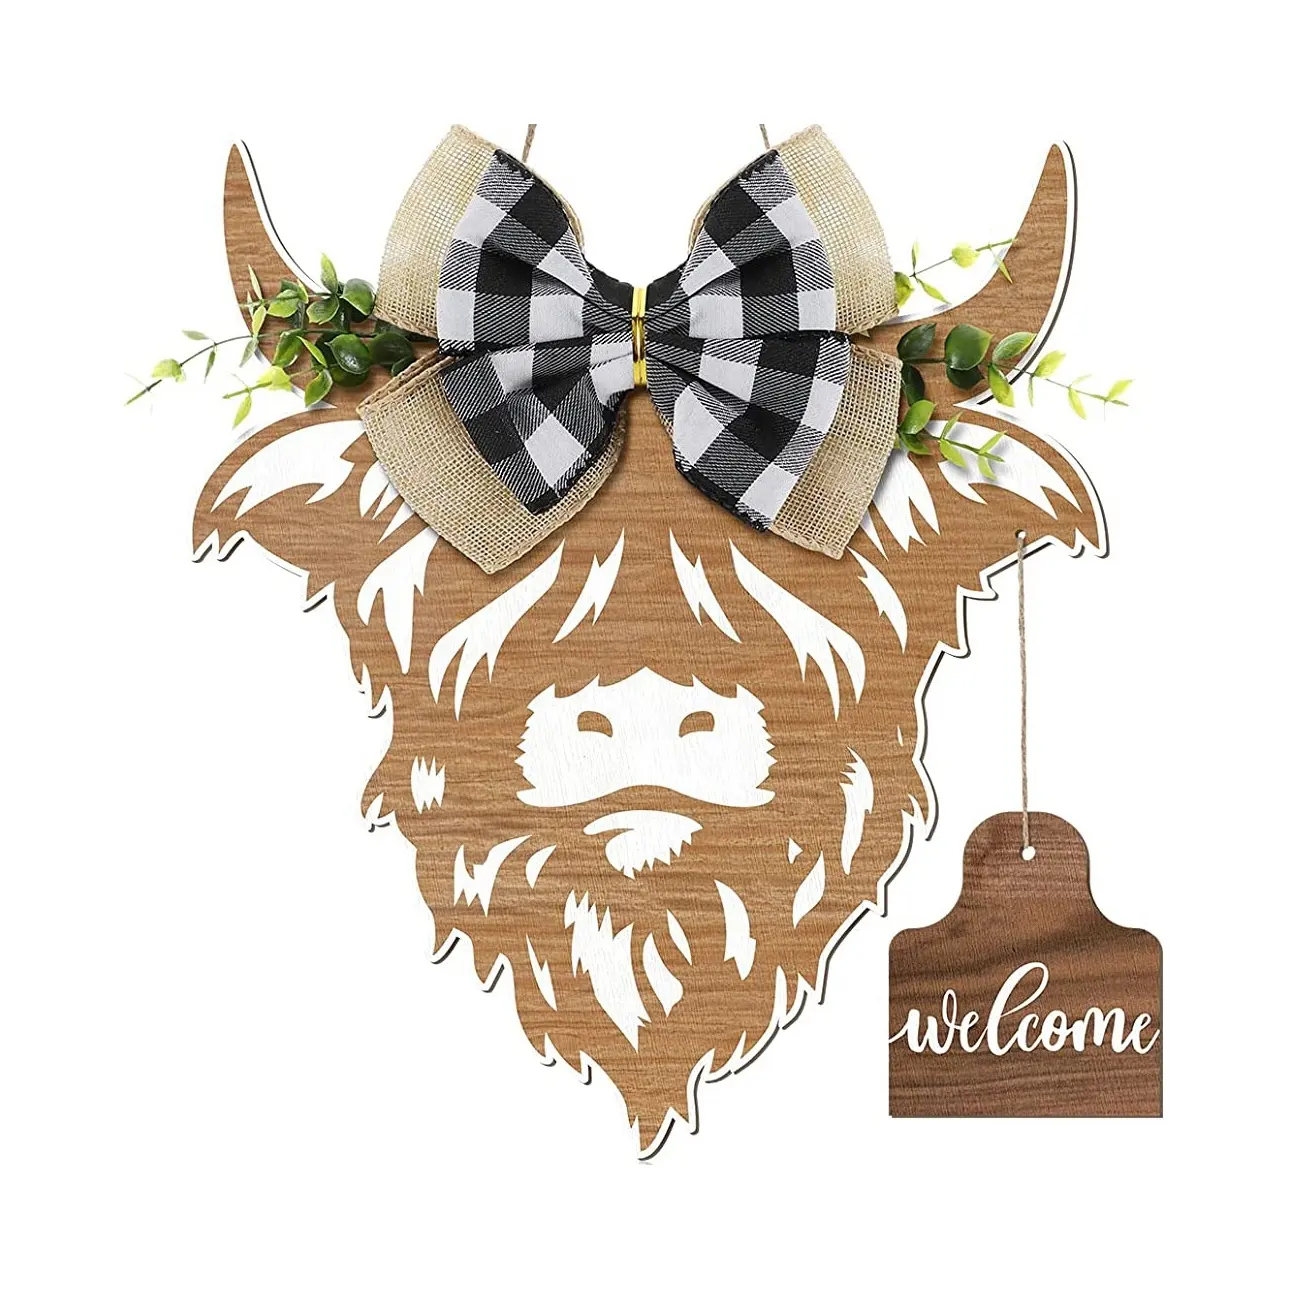 Highland Cow Door Hanger, Wooden Board Highland Cows Cattle Welcome Sign Decoration for Sweet Home